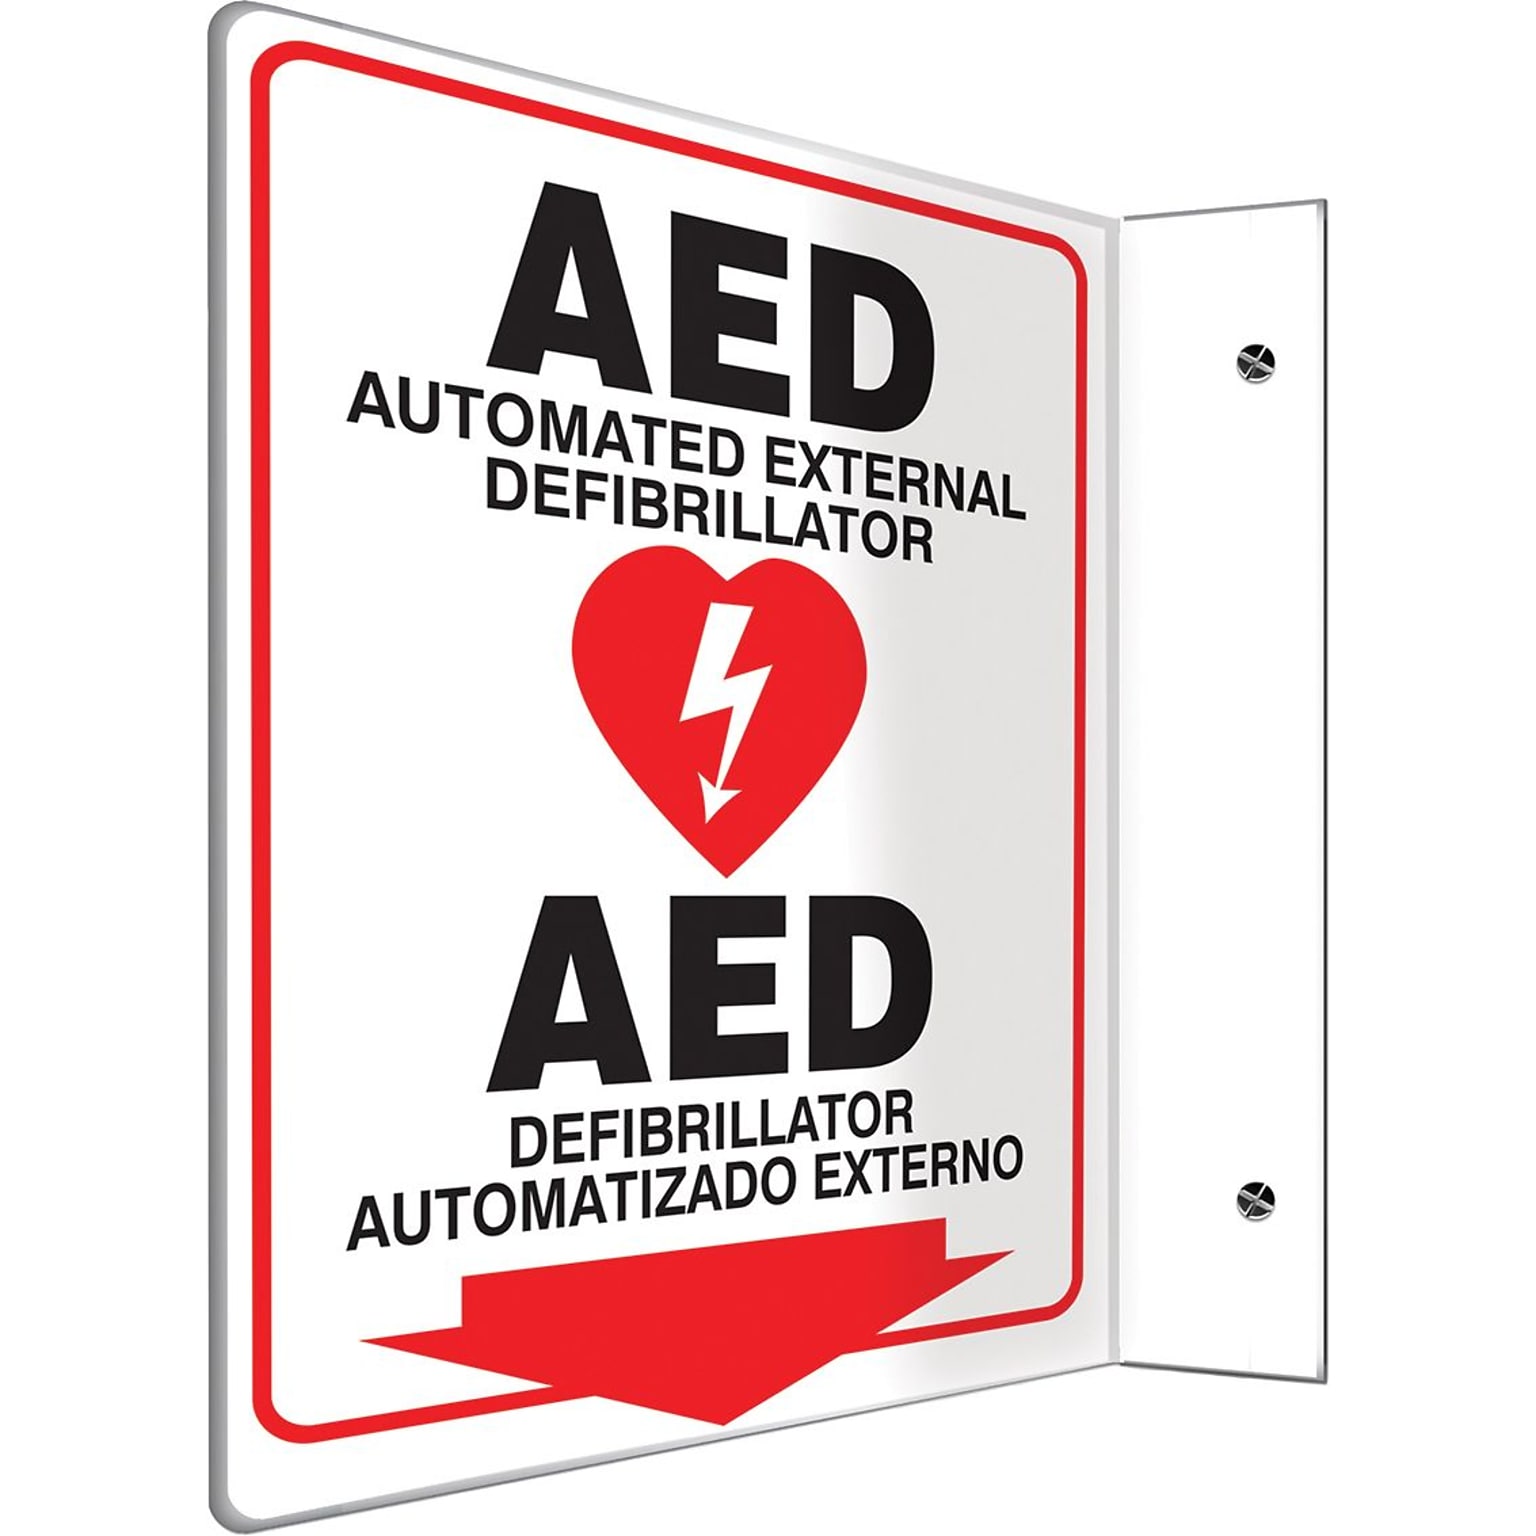 Accuform AED Automated External Defibrillator.. Projection Sign, Black/Red/White, 12H x 9W (SBPSP760)